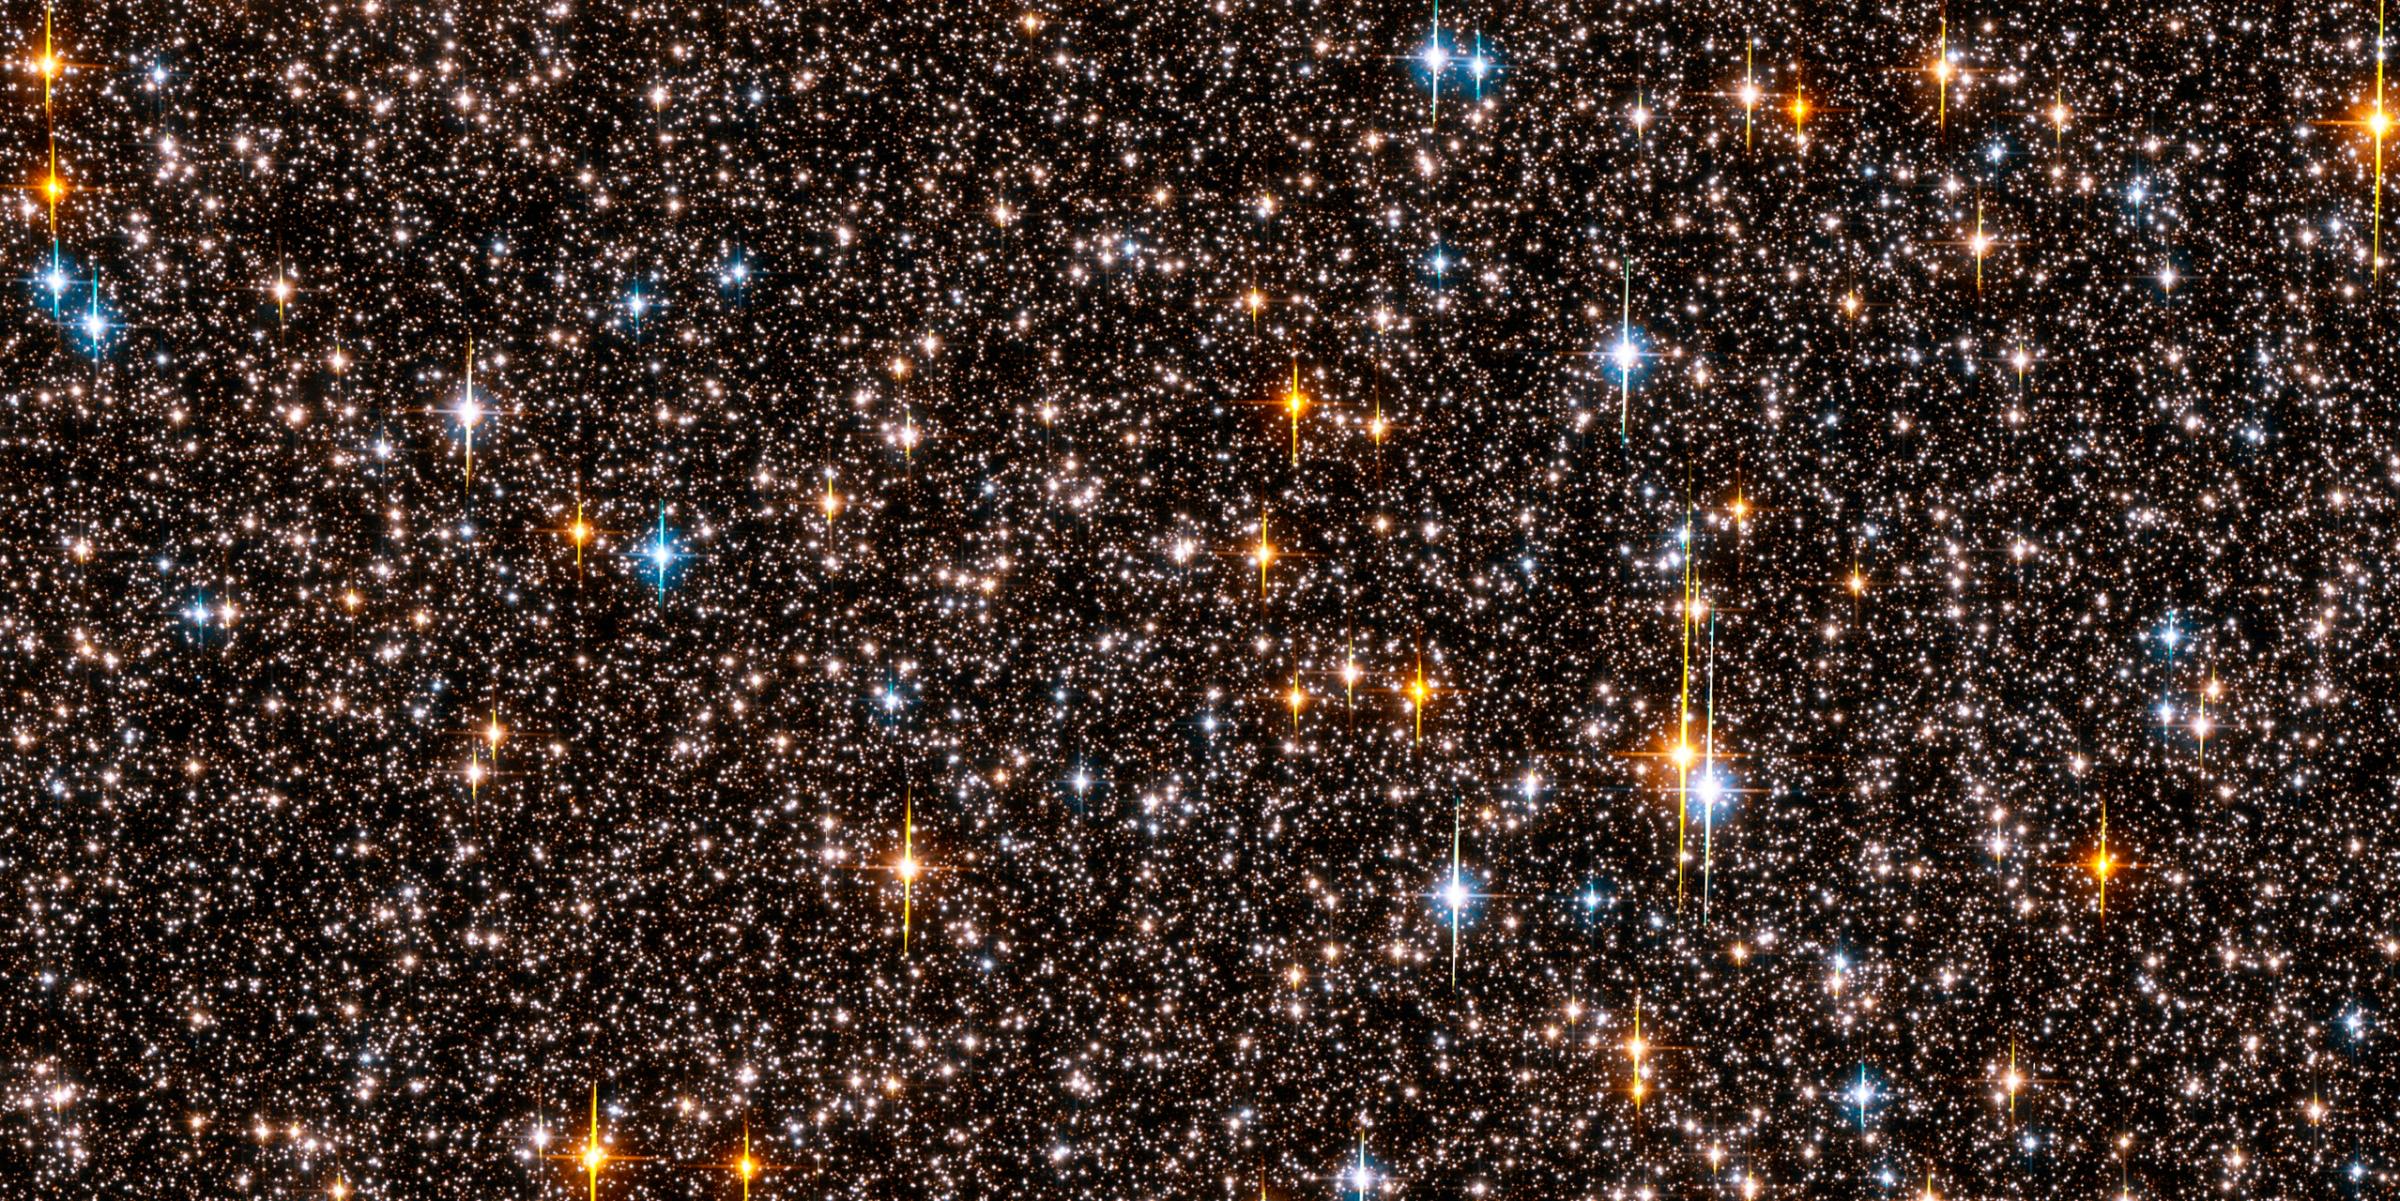 A picture released October 4, 2006 by the European Space Agency shows one-half of the Hubble Space Telescope field of view with nine stars that are orbited by planets with periods of a few days. Planets so close to their stars with such short orbital peri